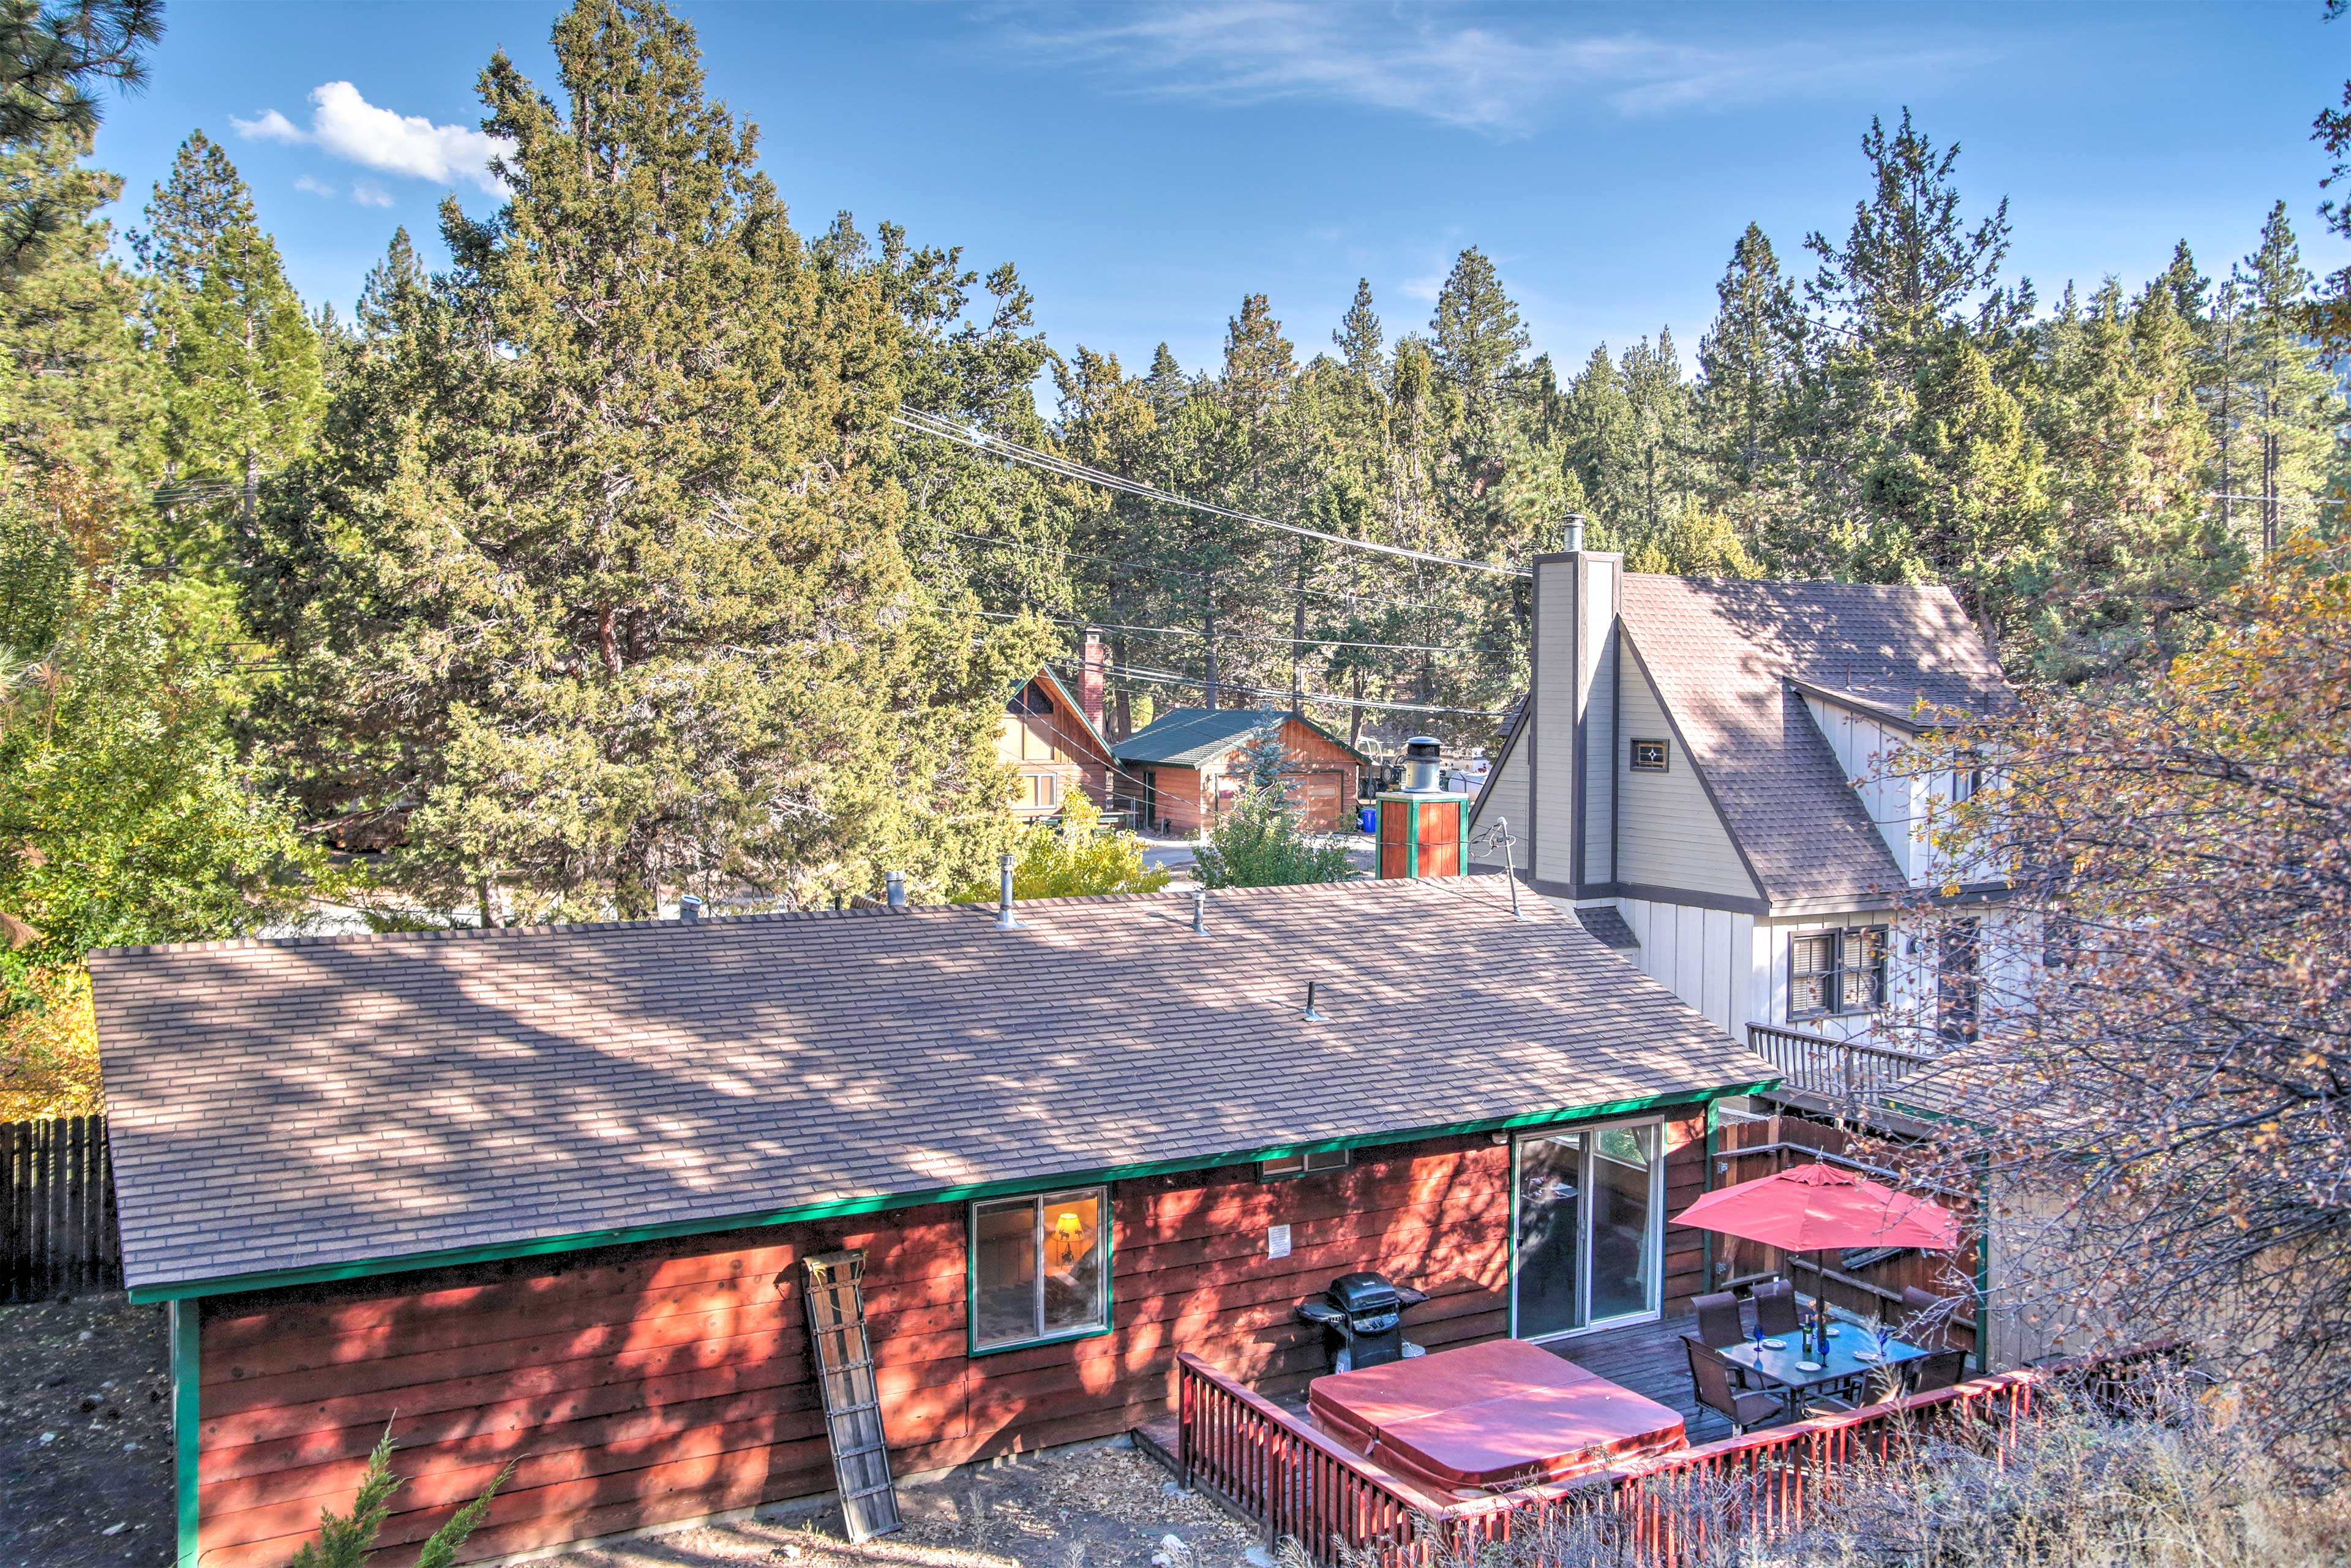 This Big Bear vacation rental cabin is the perfect escape!